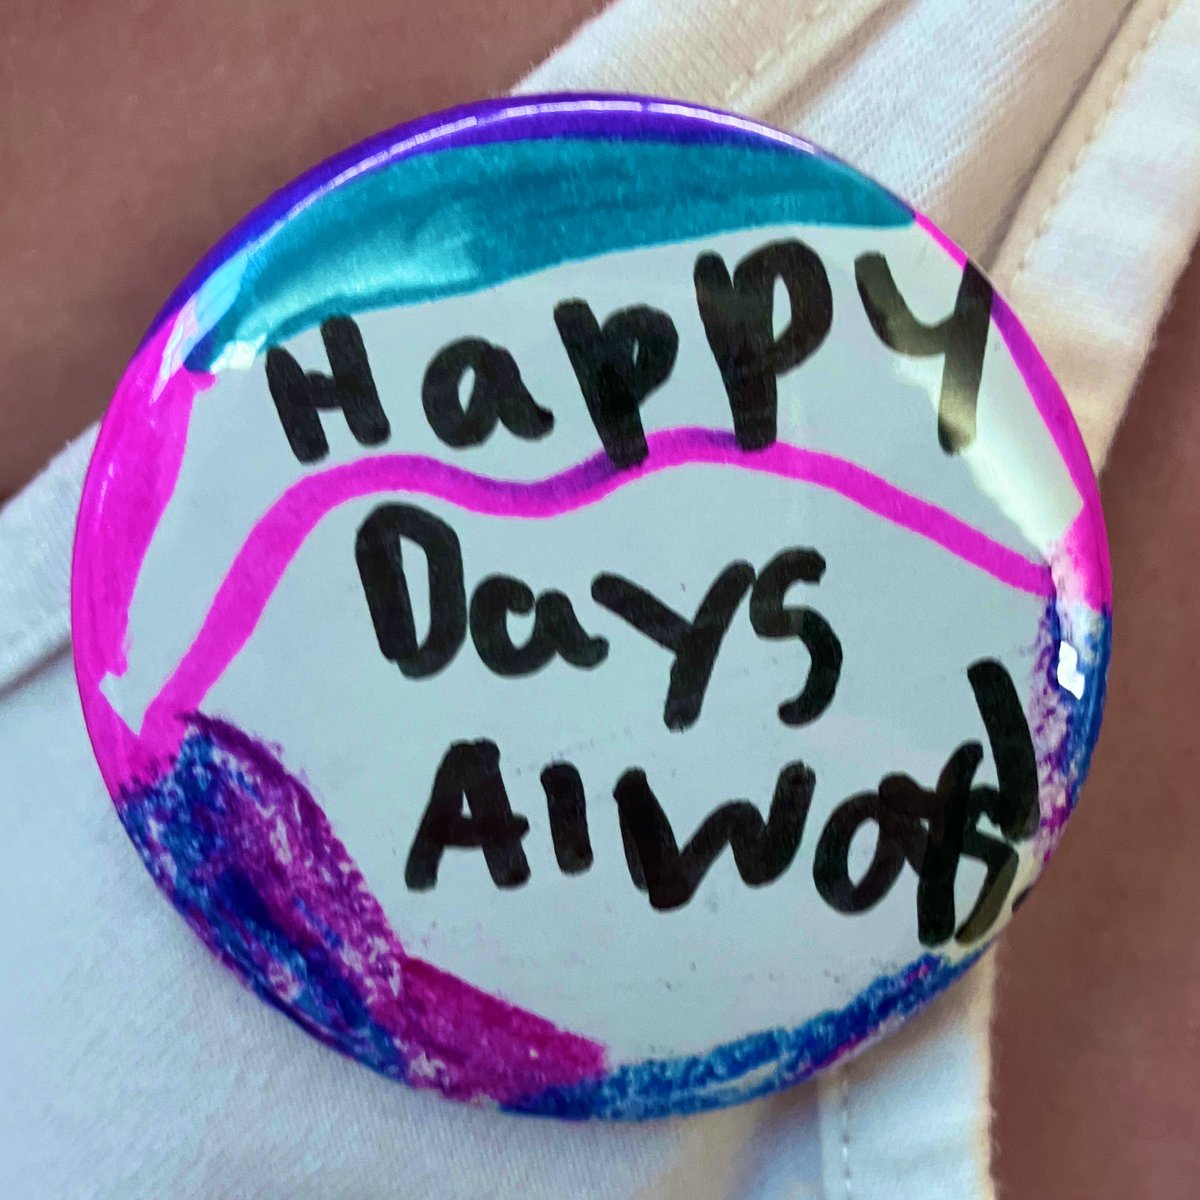 Happy Days Always!! Loved this reminder as our friends today made their very own button. #HHEHighlights